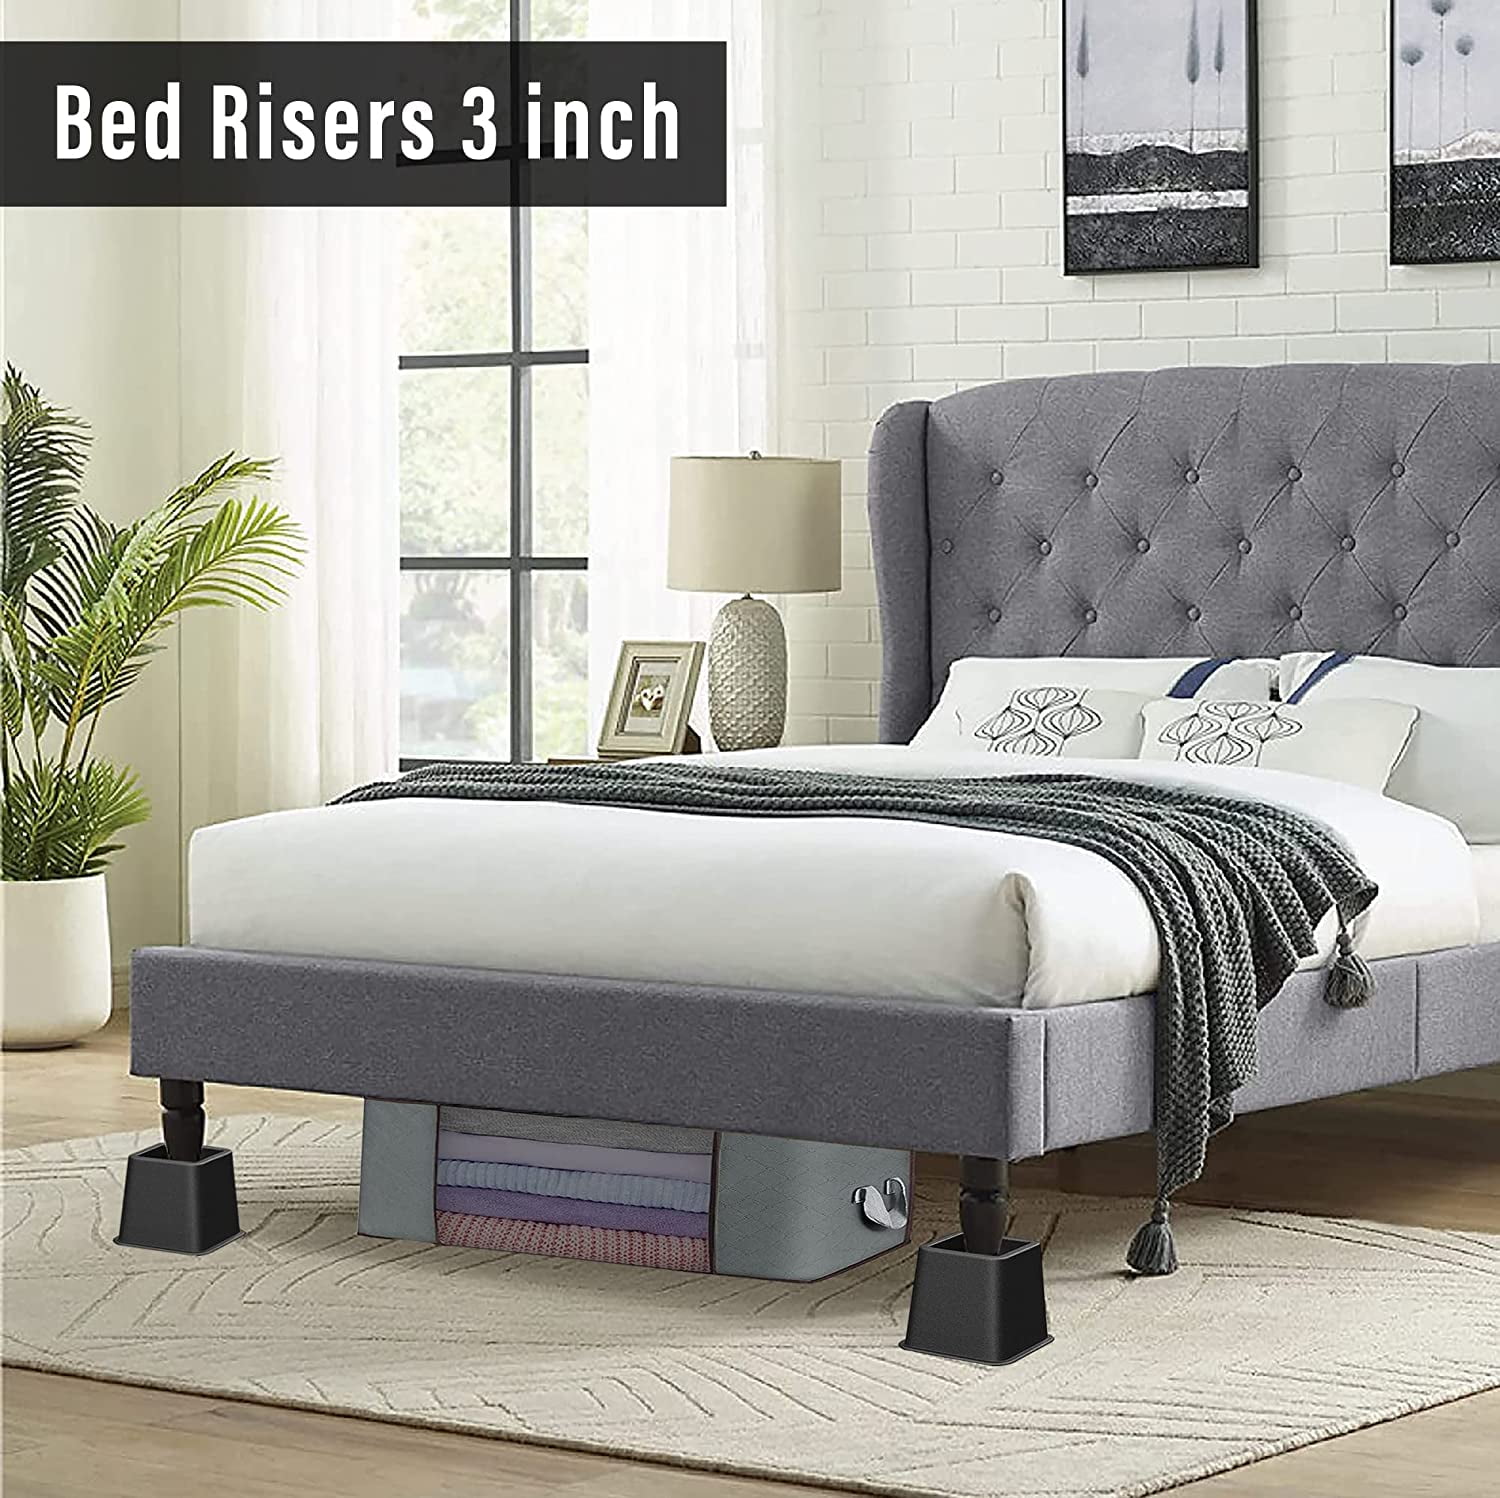 Bed Risers 3 Inch Heavy Duty, Furniture Risers for Bed Frame, Couch, Desk,  Chair, Lifts Up to 1,500 lb, Set of 6, Black